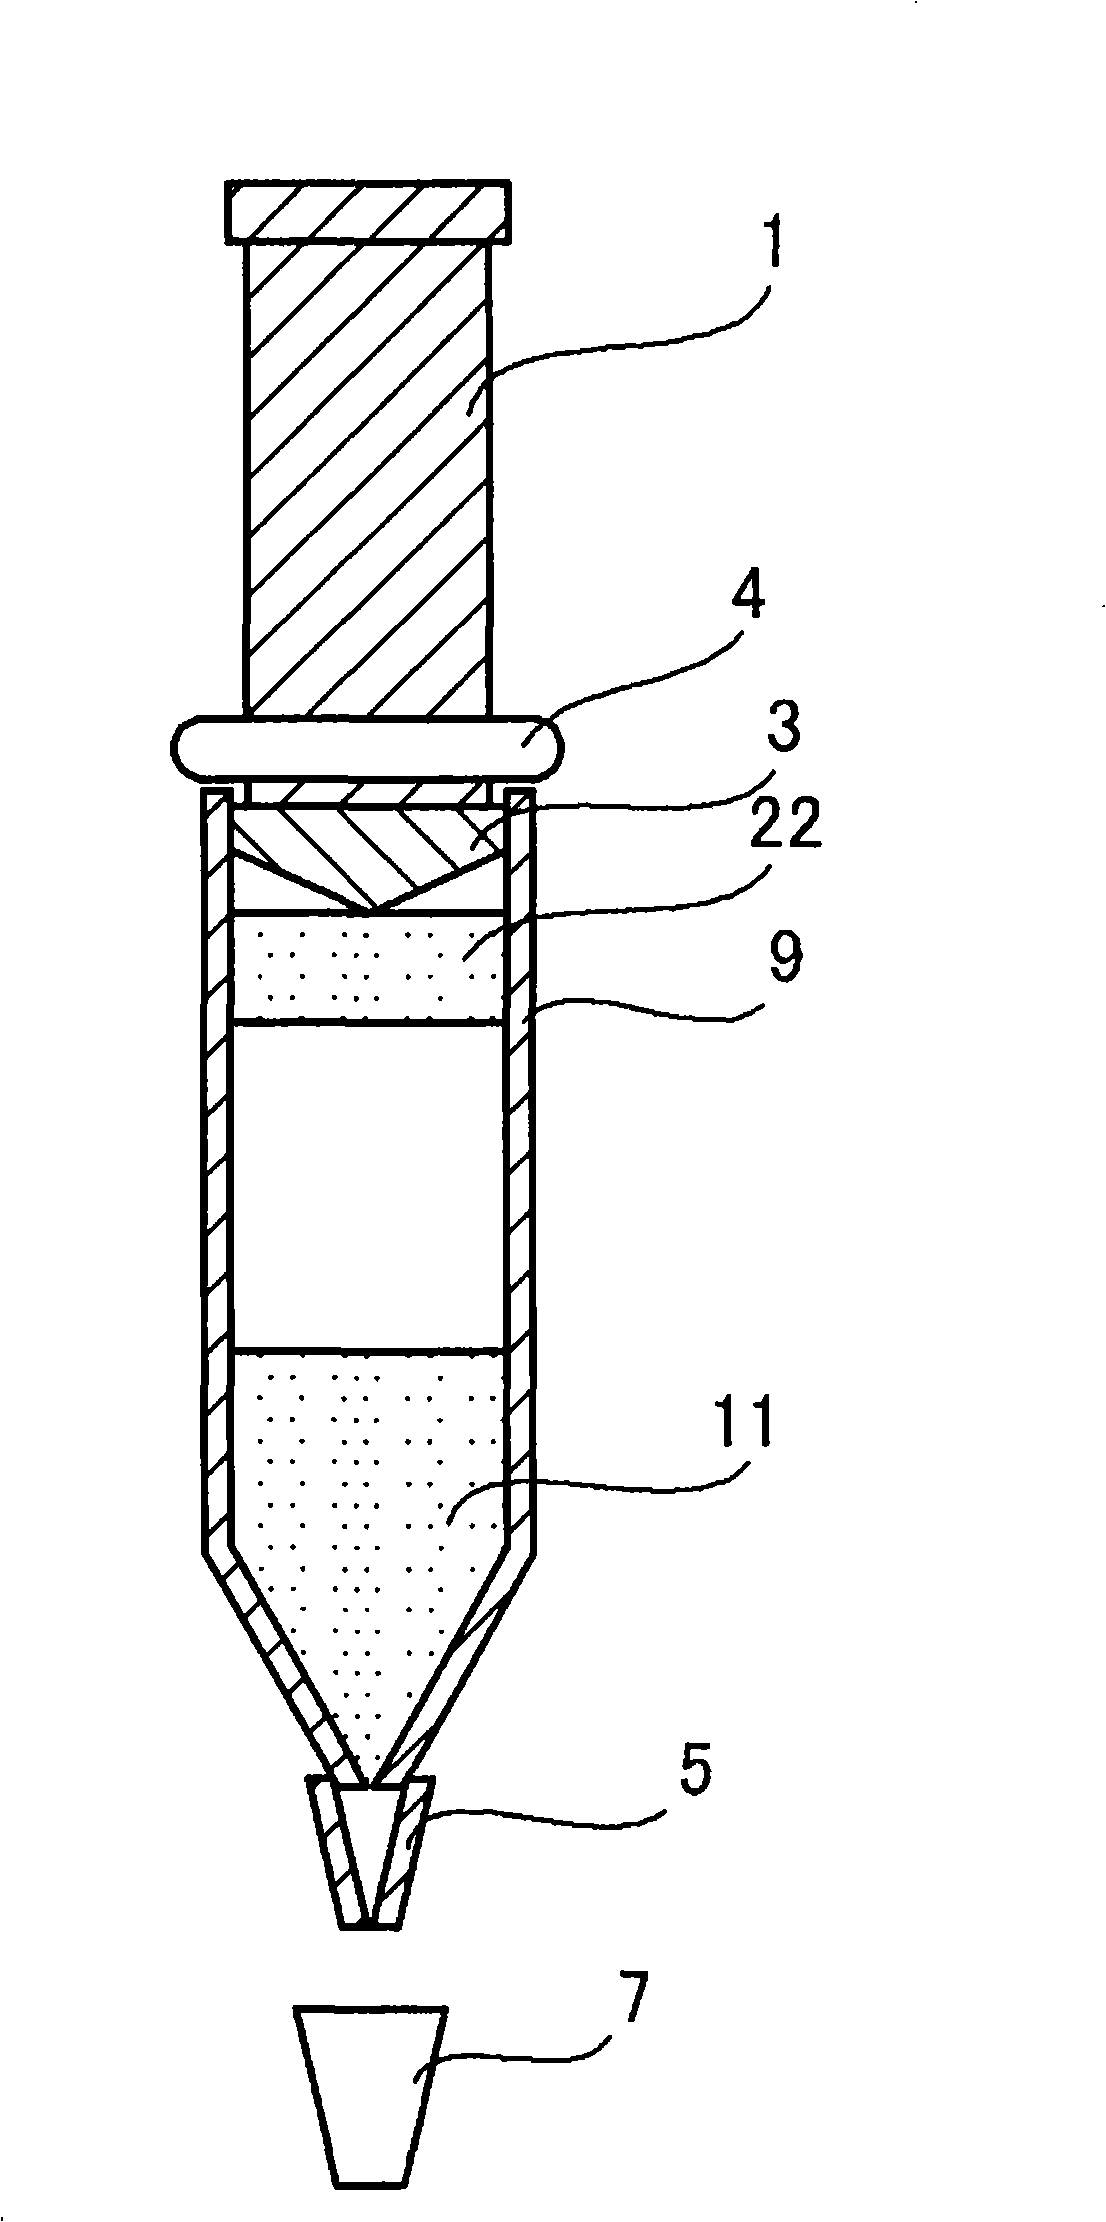 Syringe-shaped microorganism culture device